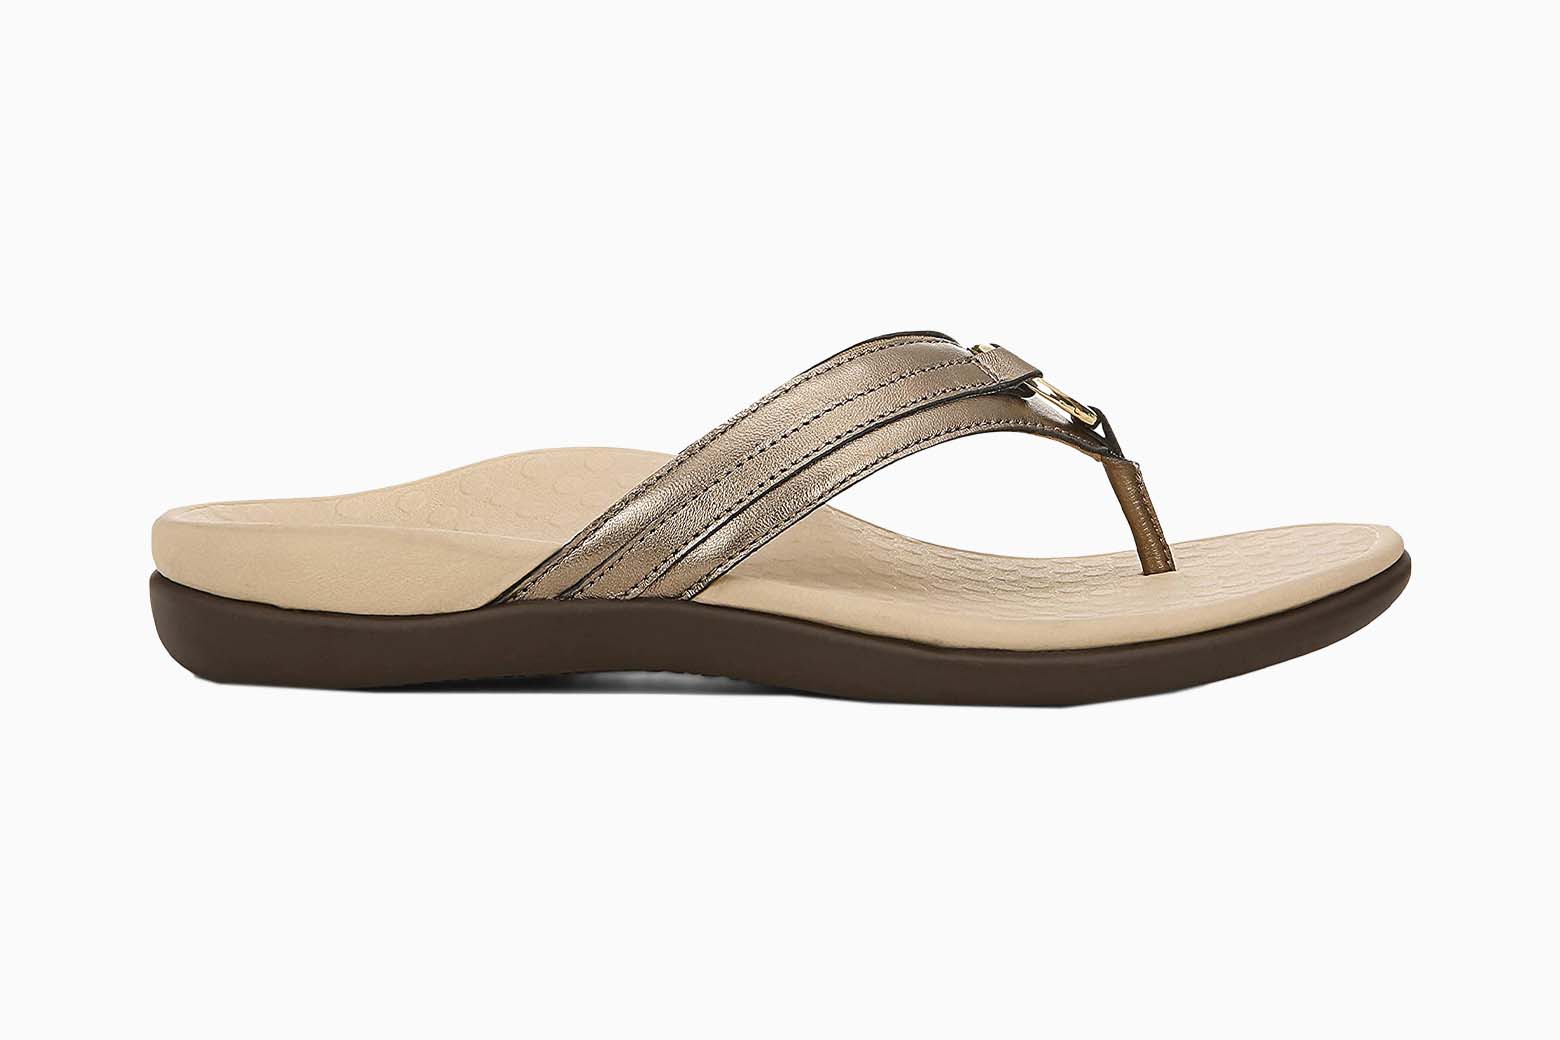 15 Most Comfortable FlipFlops For Women Style And Support